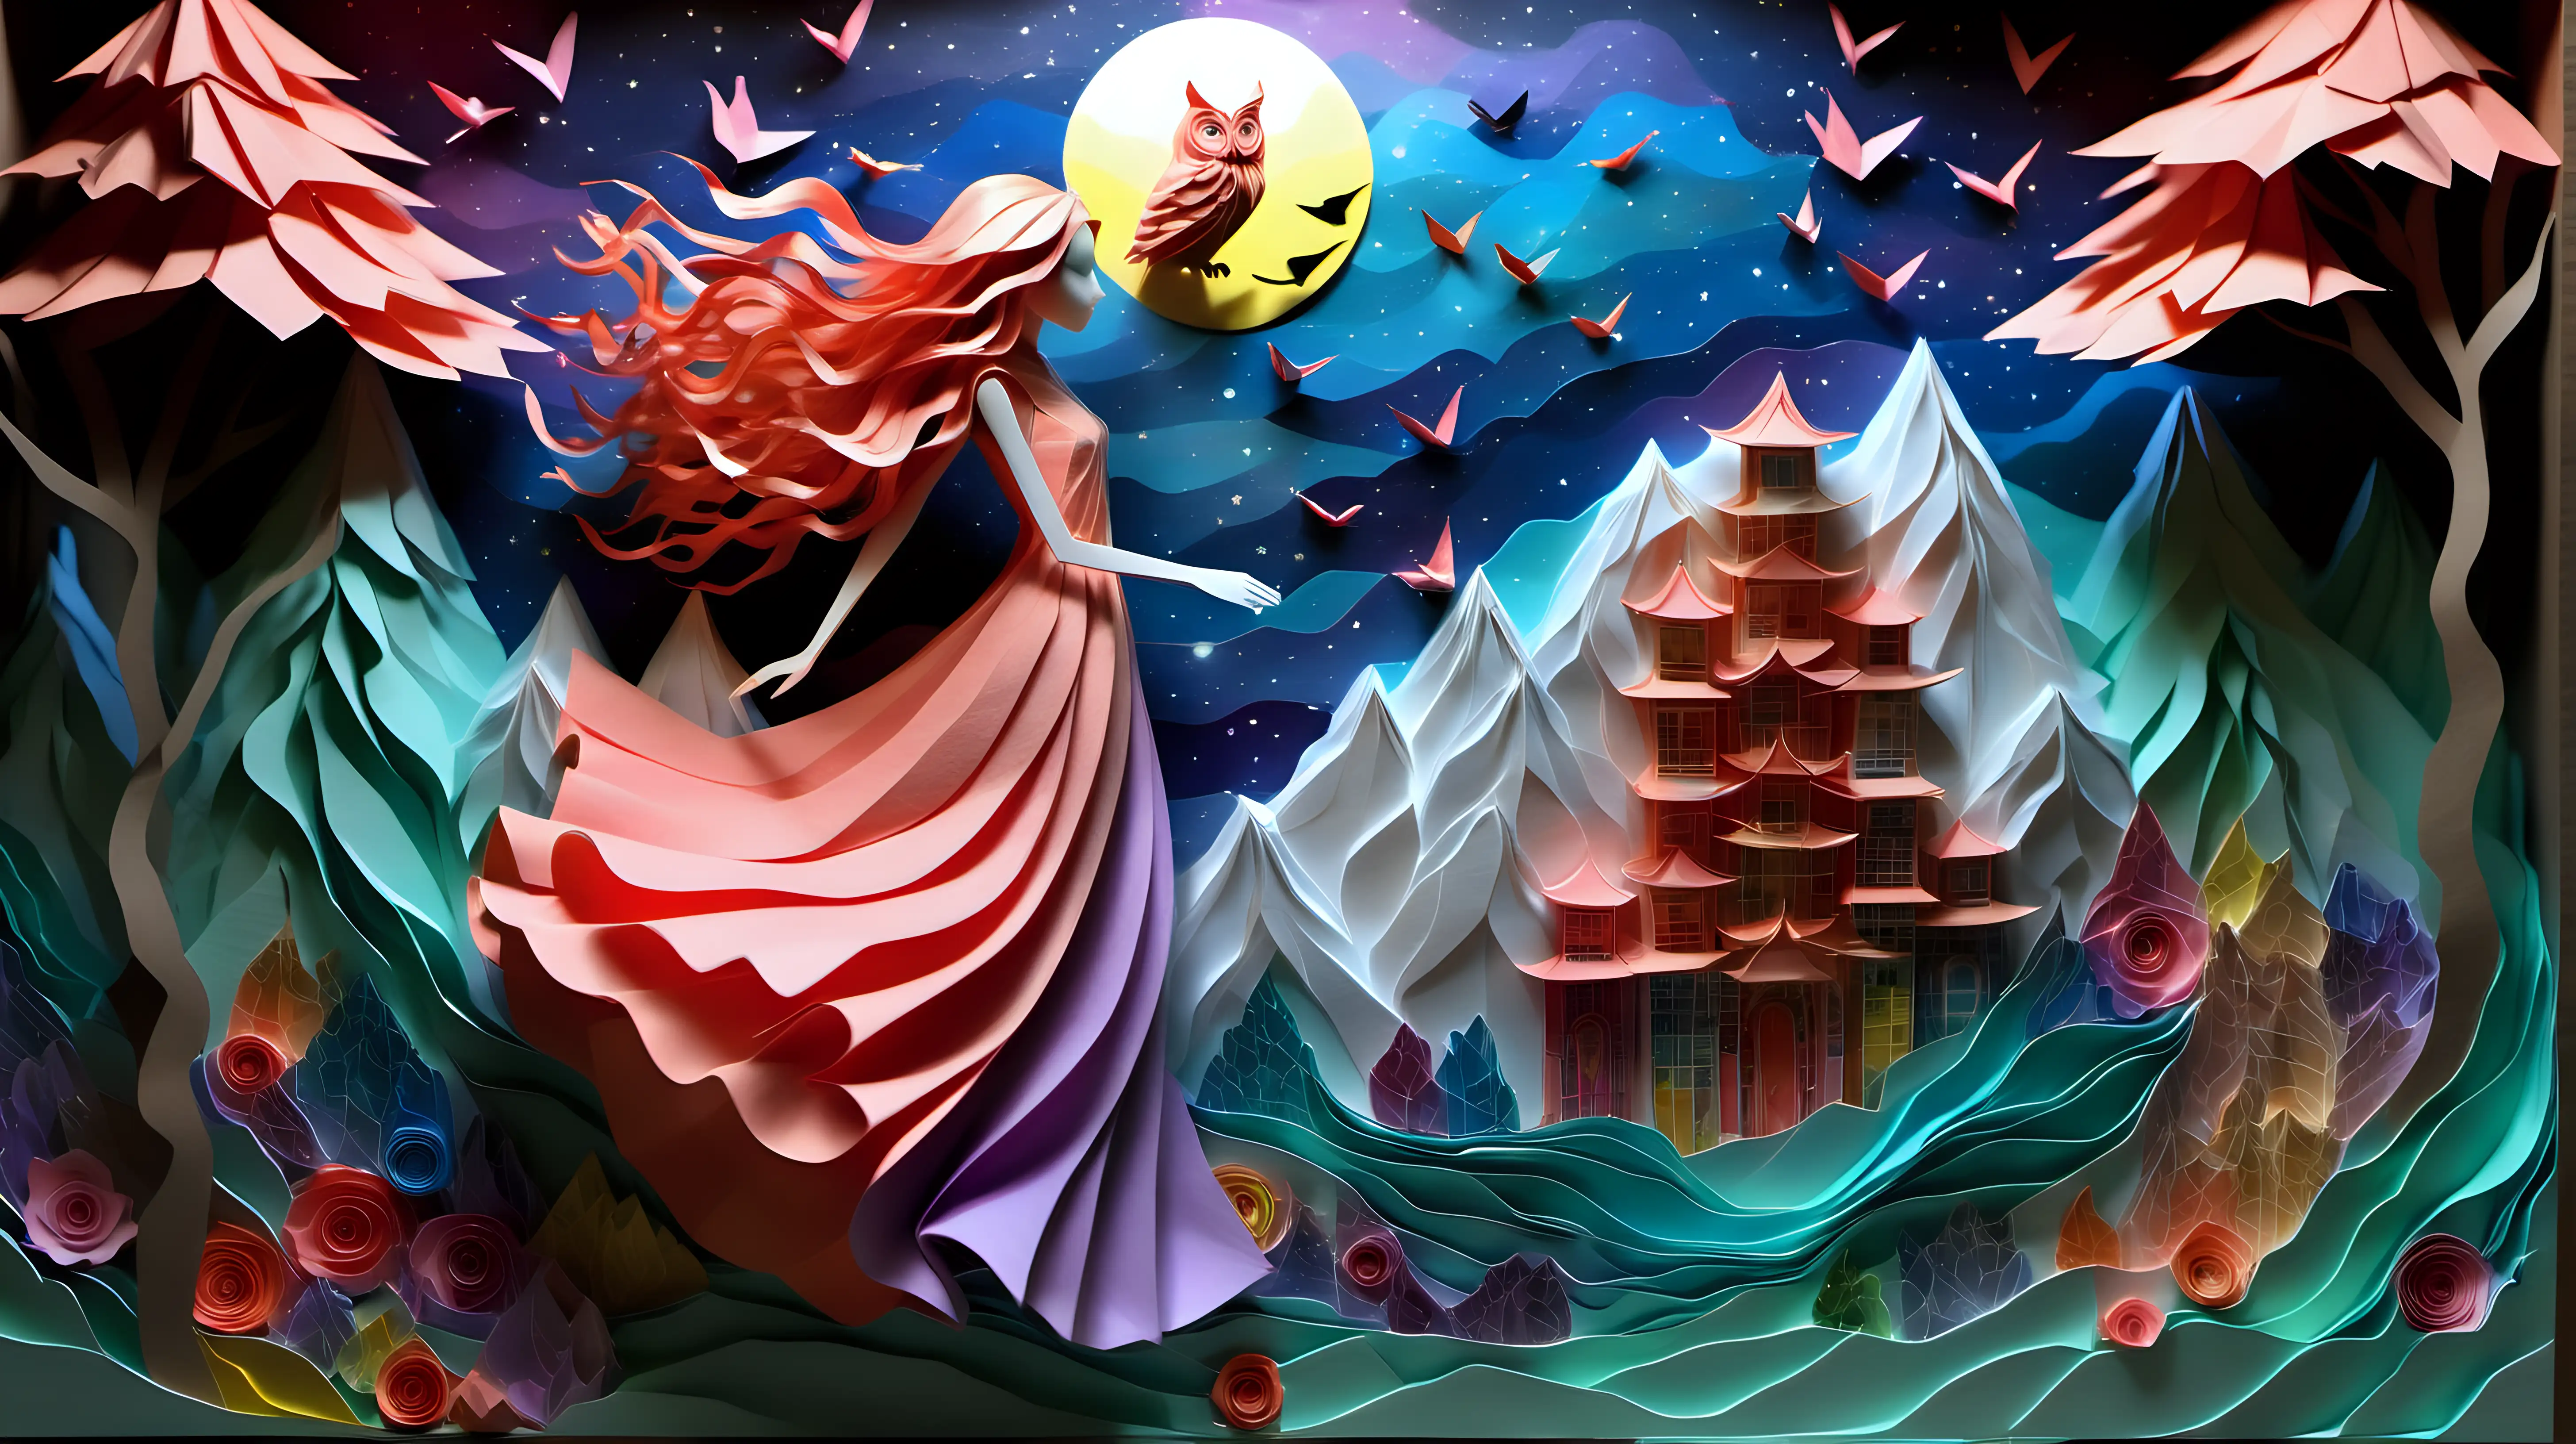 Abstract art paper art origami, DIORAMA, ghibli inspired painting  of beautiful enchanting slender, long coral wavy hair, sheer flowy dress, 18 YEAR OLD girl who shape-shifts into an owl, ethereal owl princess, playing with a big colorful owl in an enchanted forest skyline, flowers, fireflies and moonlight, sea of clouds, mountain, temple, colorful, cliff